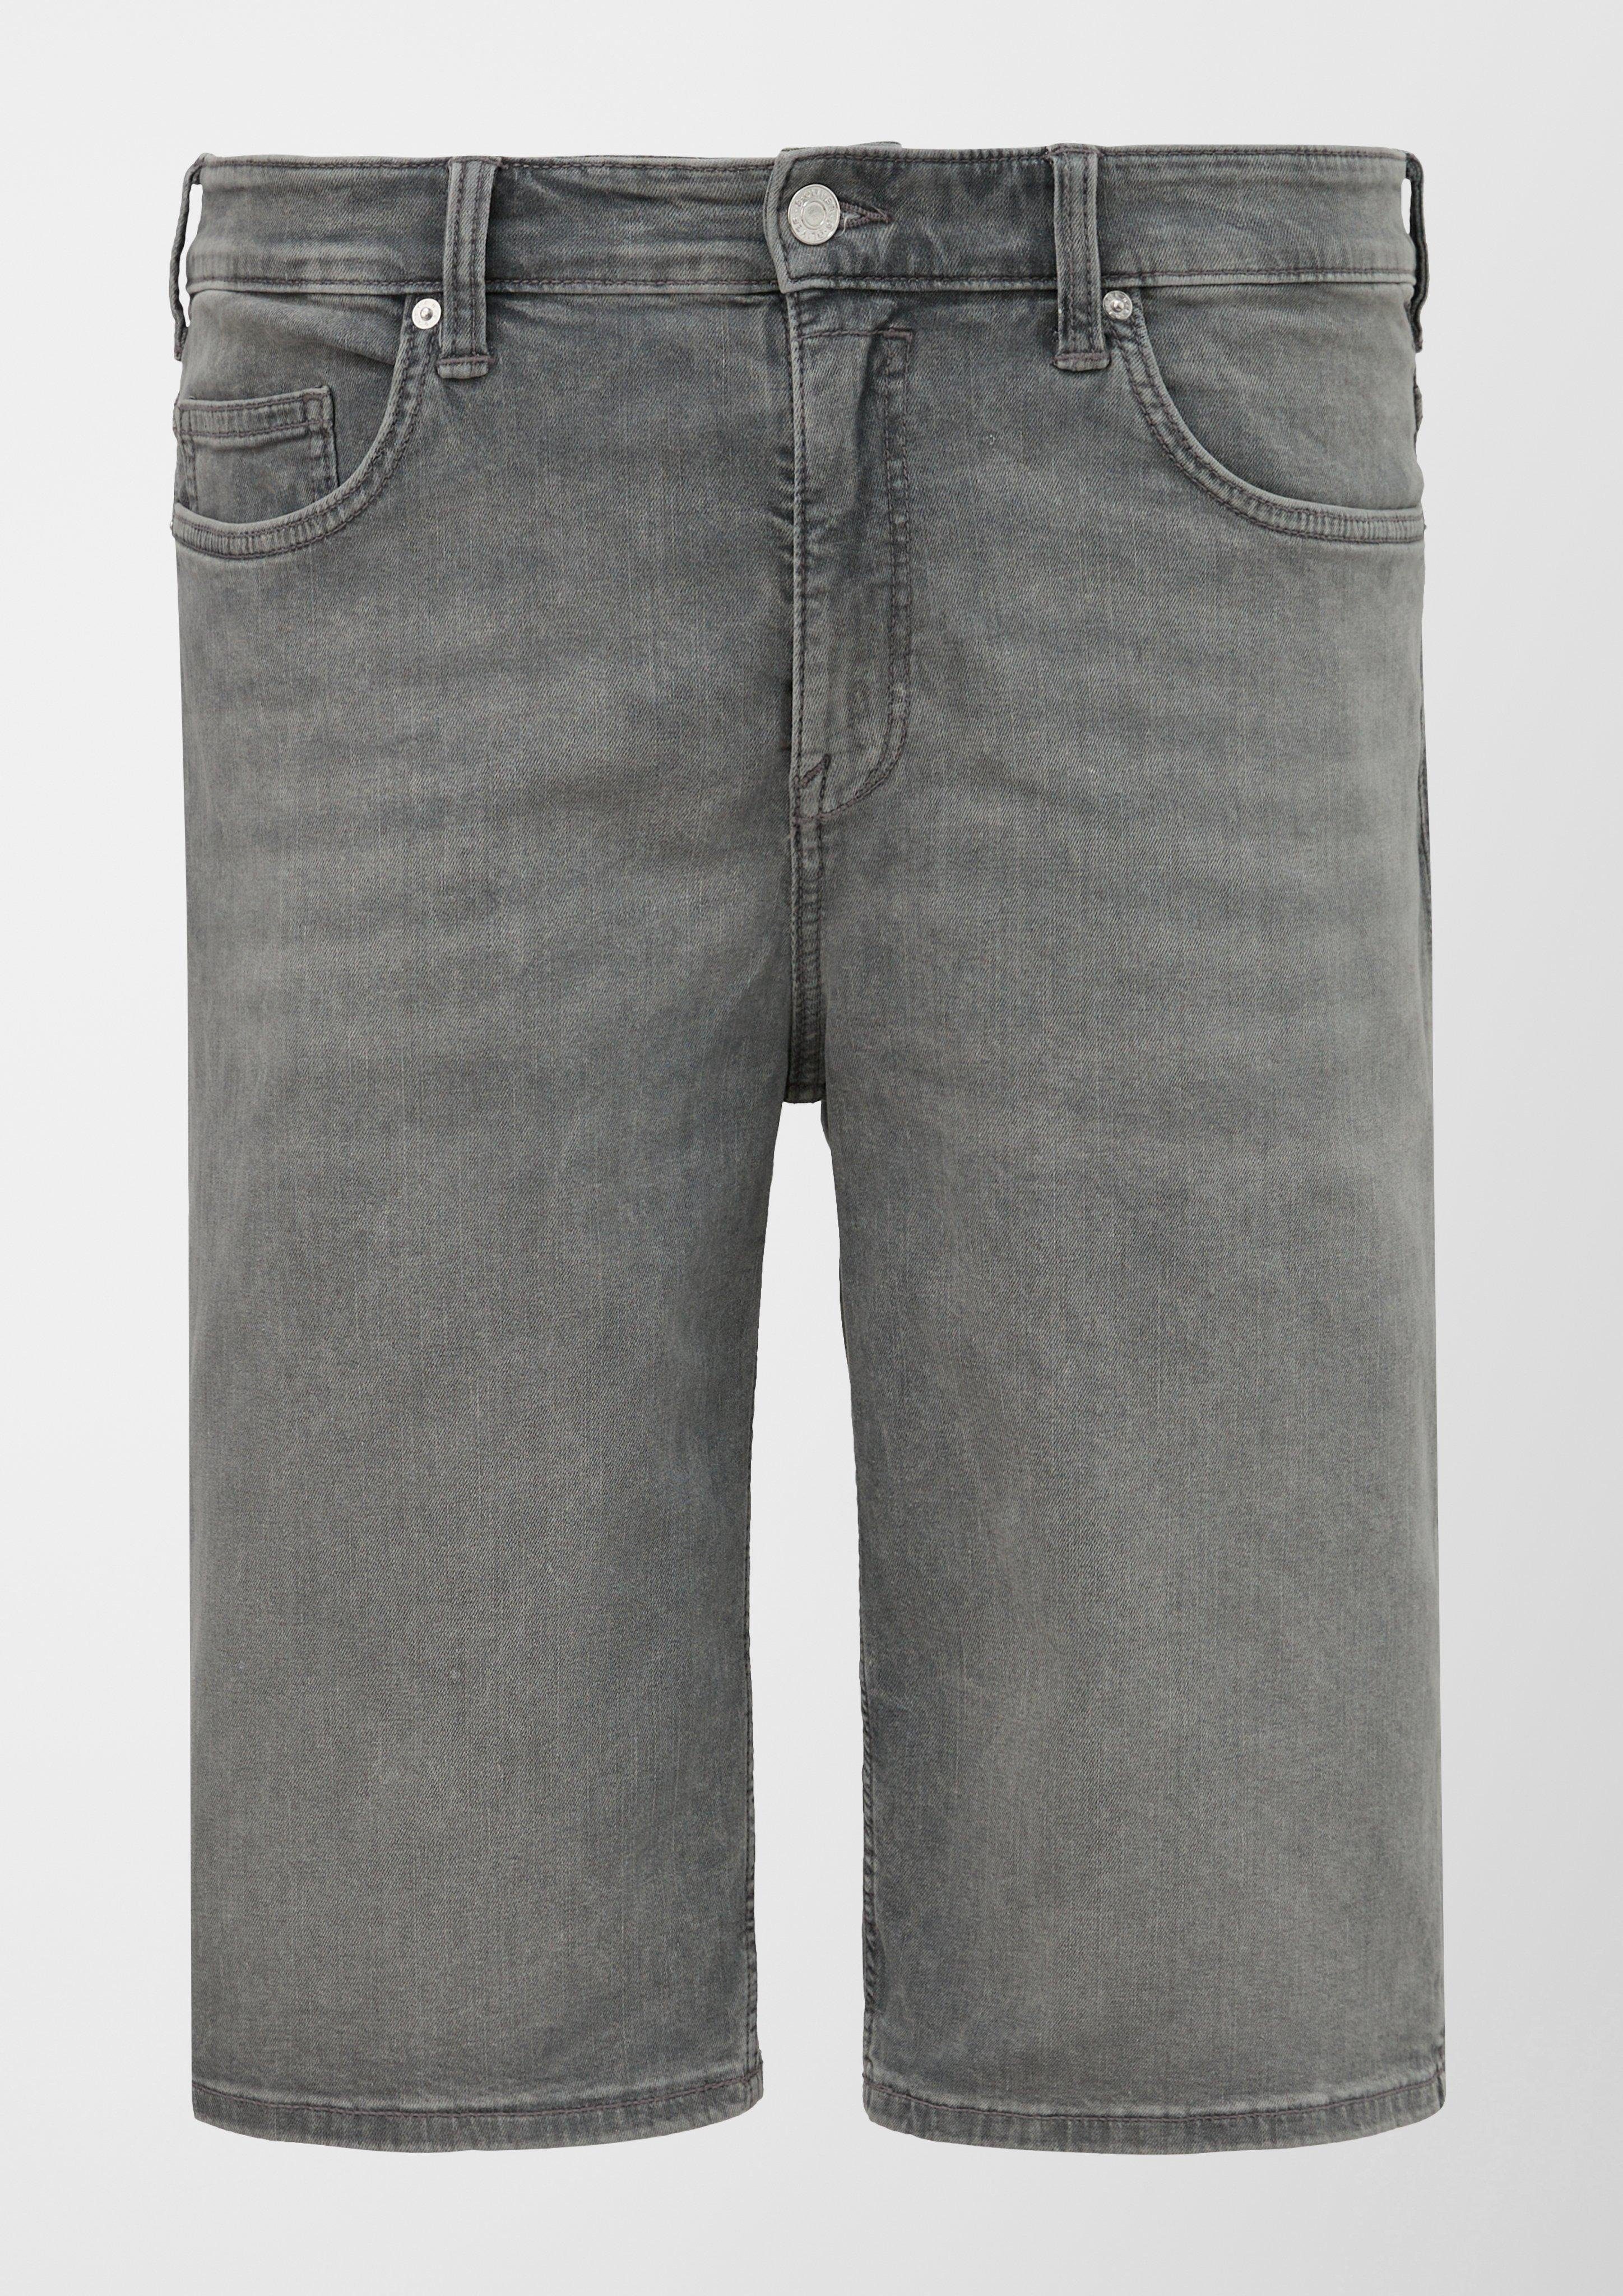 s.Oliver Jeansshorts Jeans-Bermuda Casby / Relaxed Fit / Mid Rise / Straight Leg Waschung steingrau